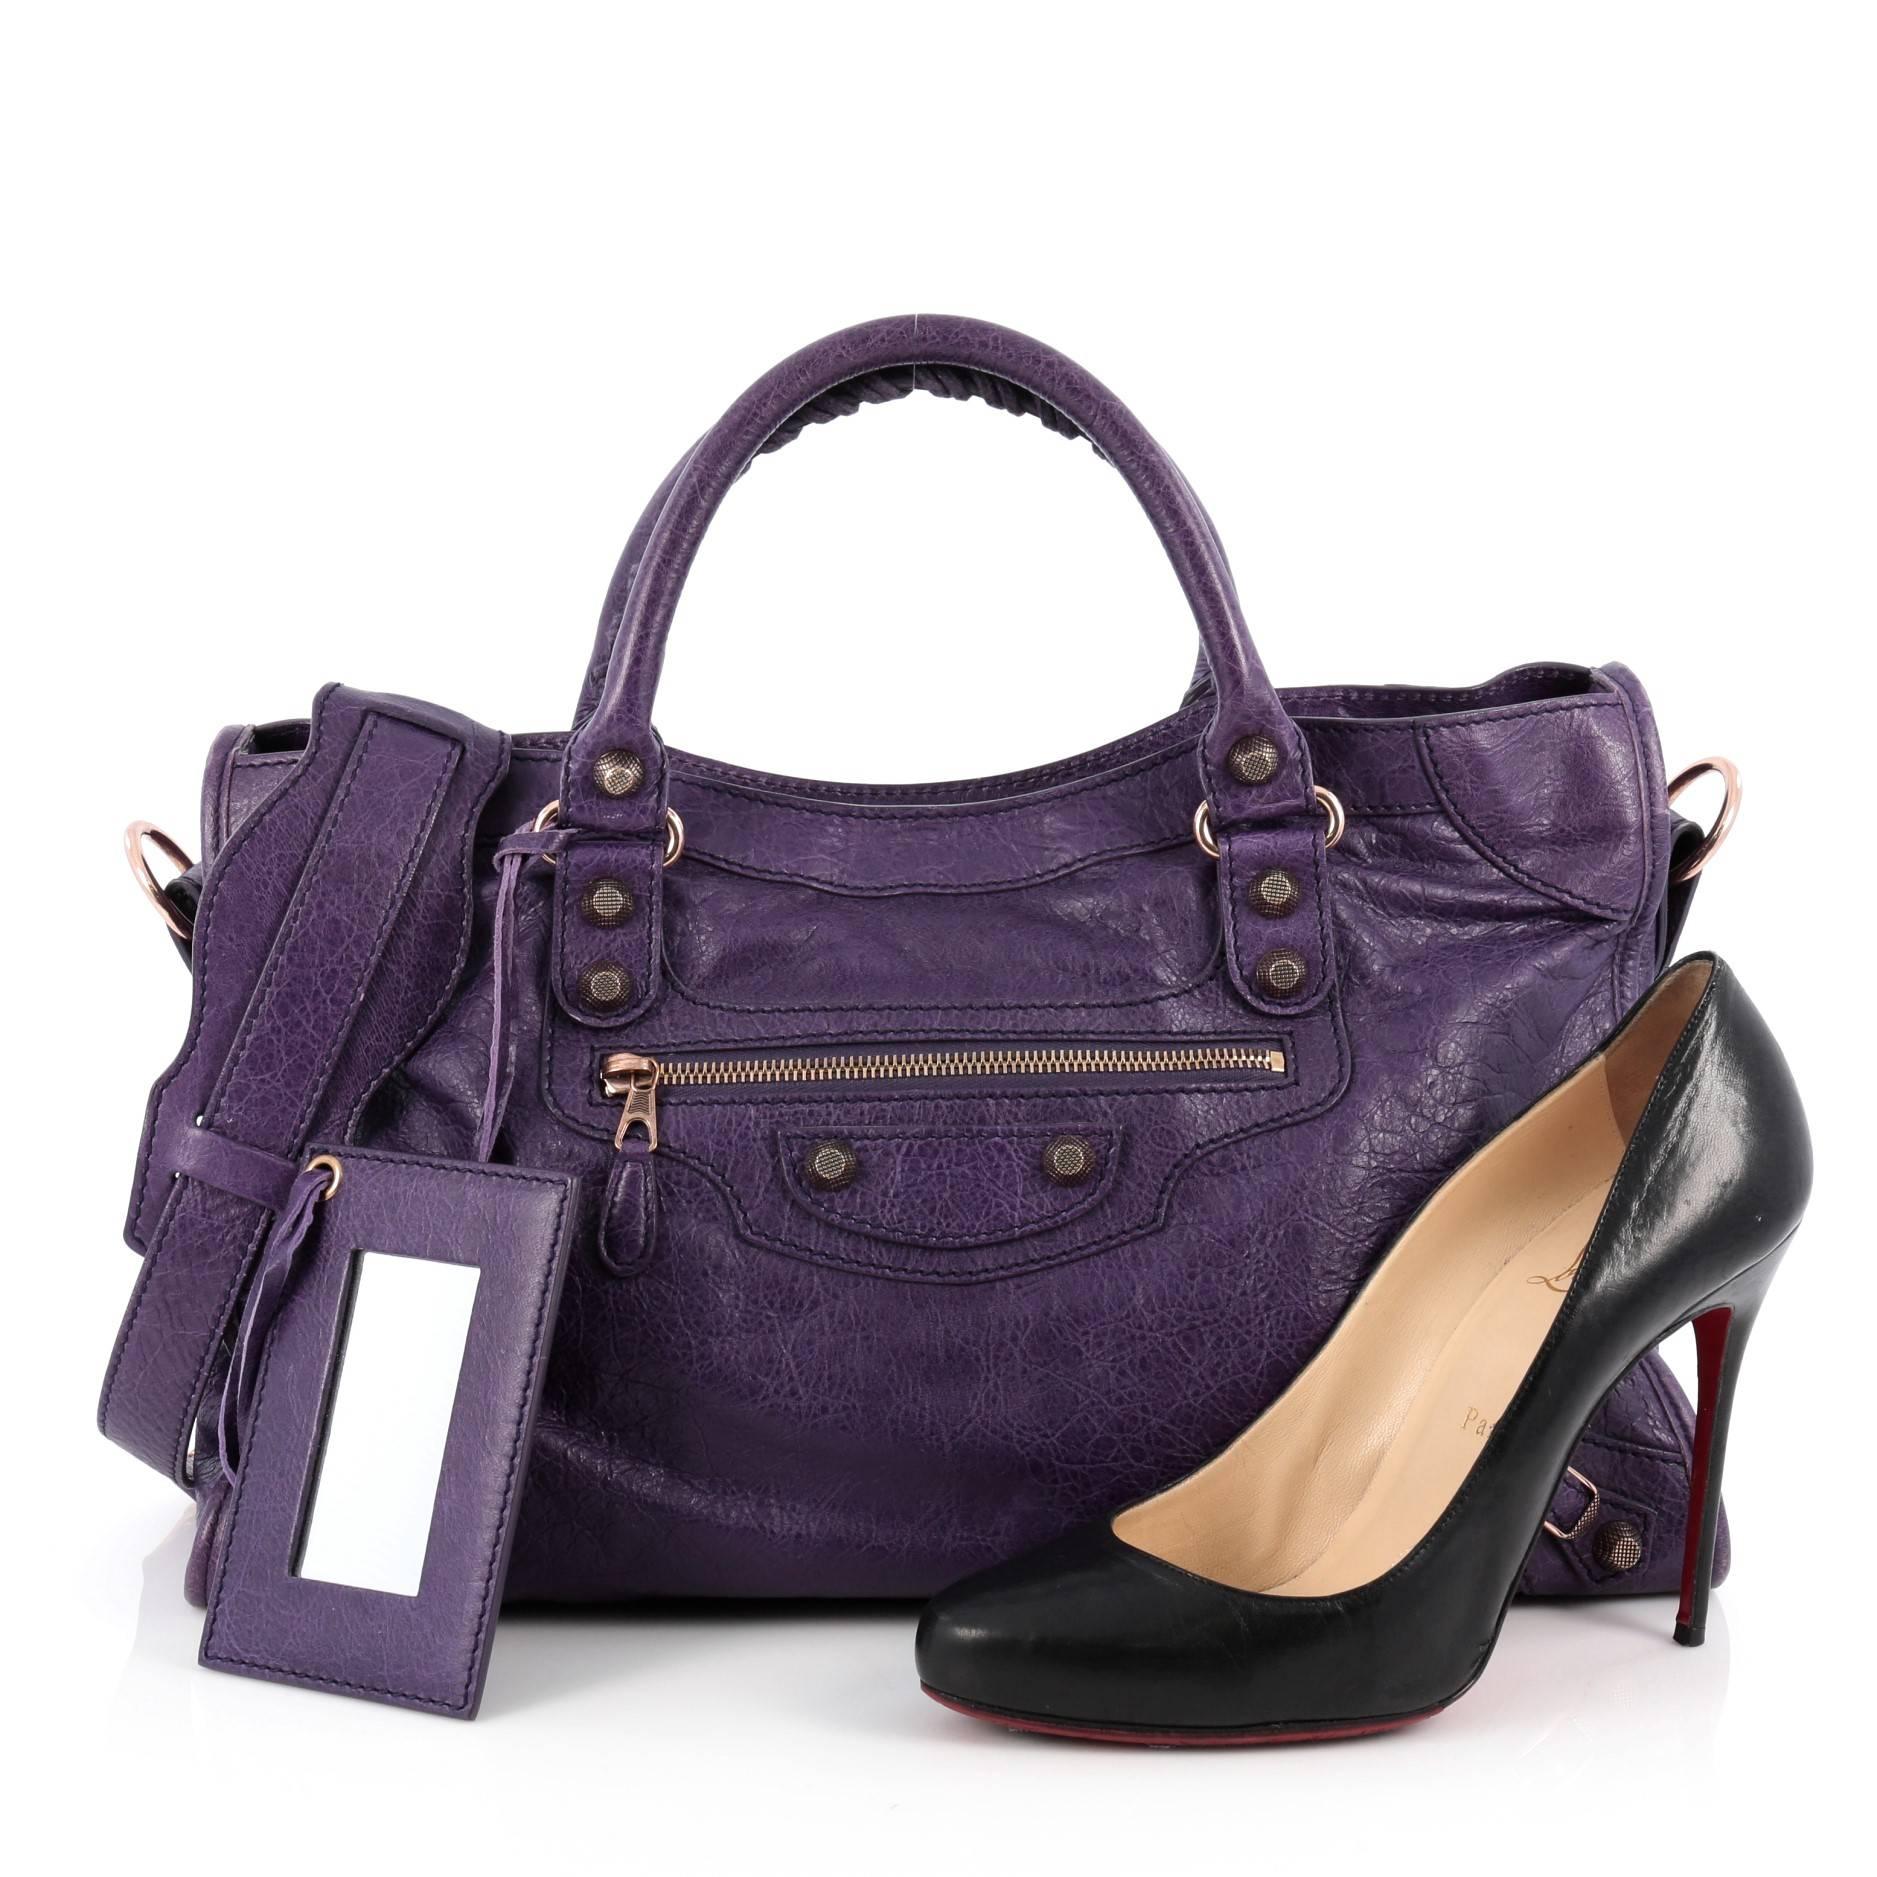 This authentic Balenciaga City Giant Studs Handbag Leather Medium is for the on-the-go fashionista. Constructed from crocus purple leather, this popular bag features dual braided woven tall handles, exterior front zip pocket, iconic Balenciaga giant